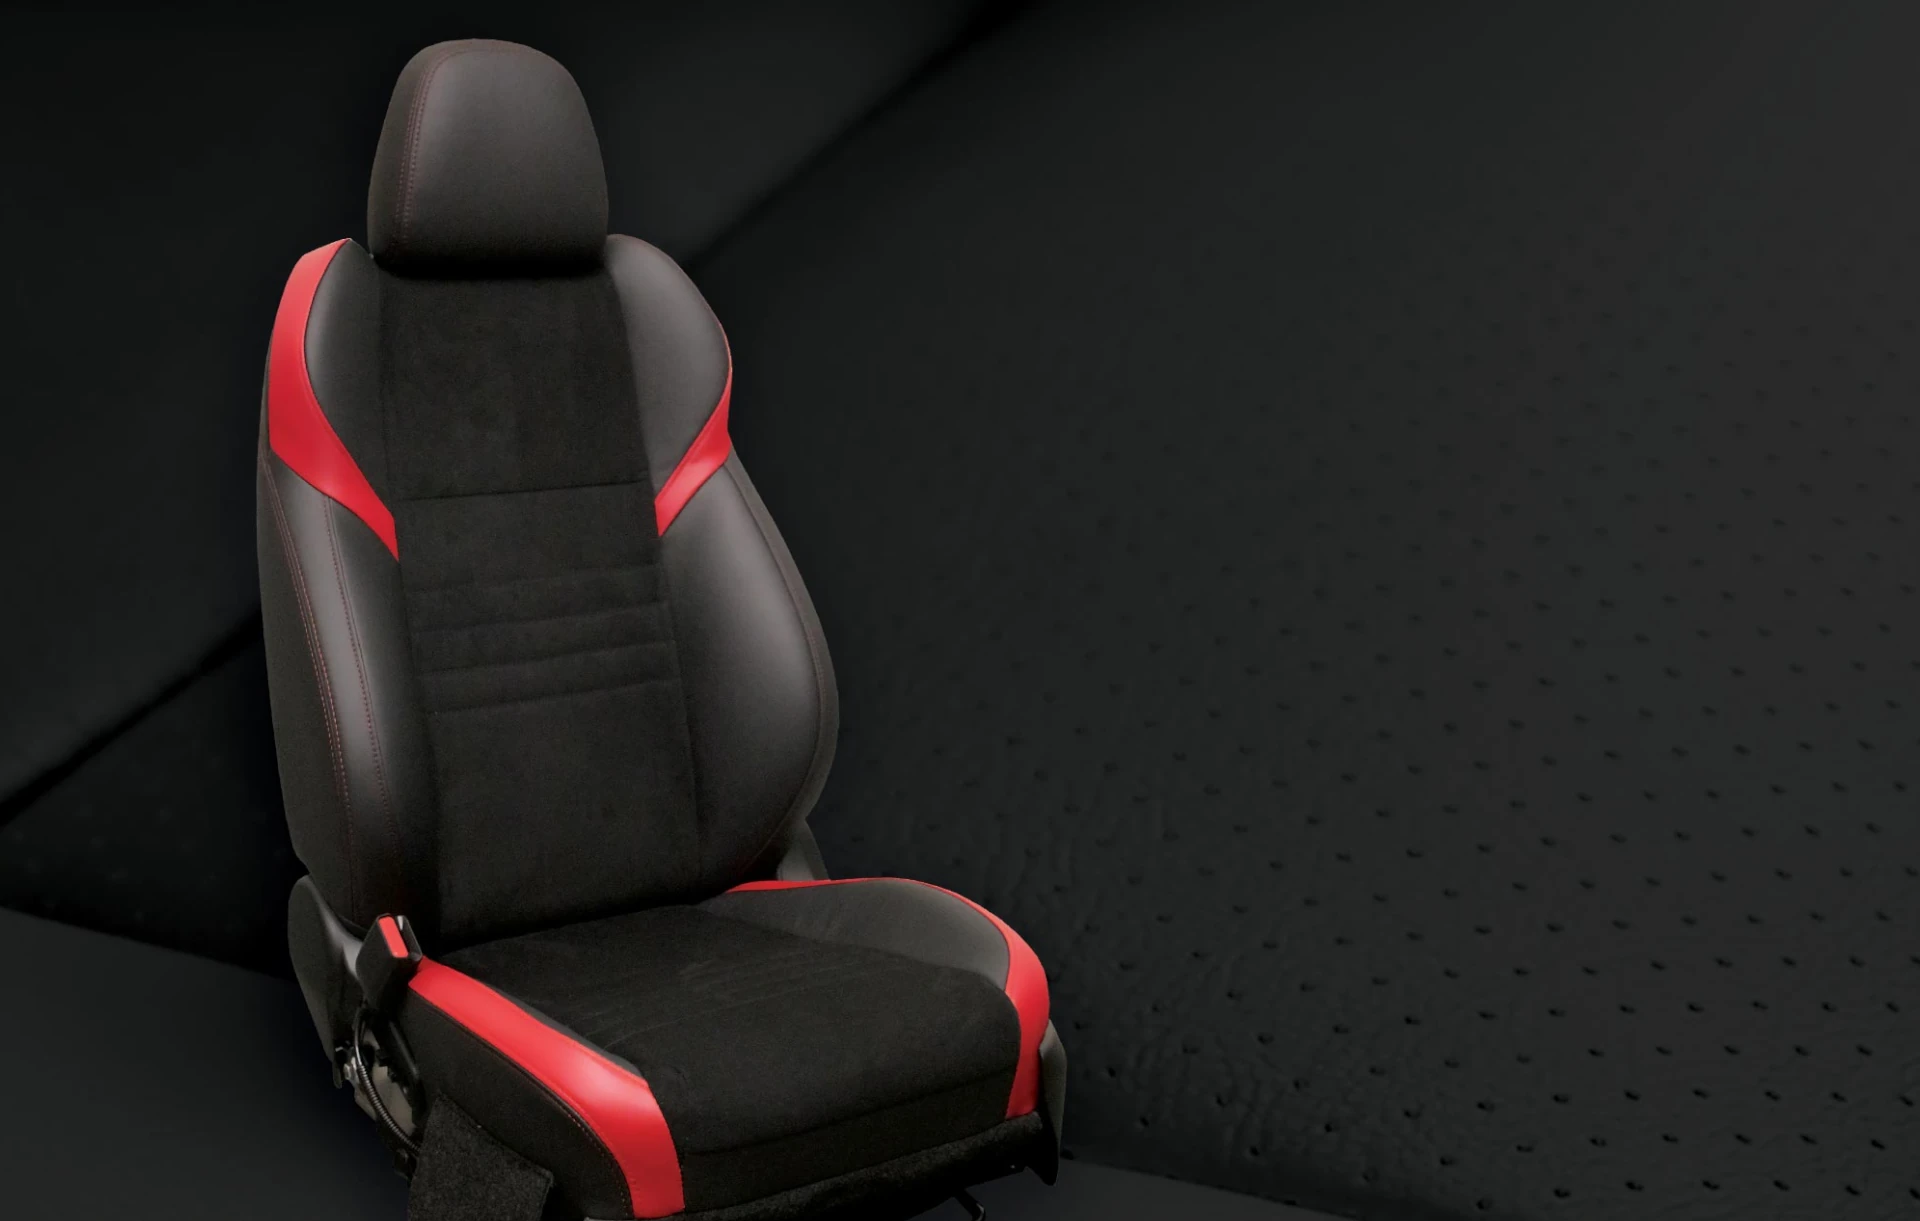 Truck Driver Seats - Supplier, Affordable, Custom Made